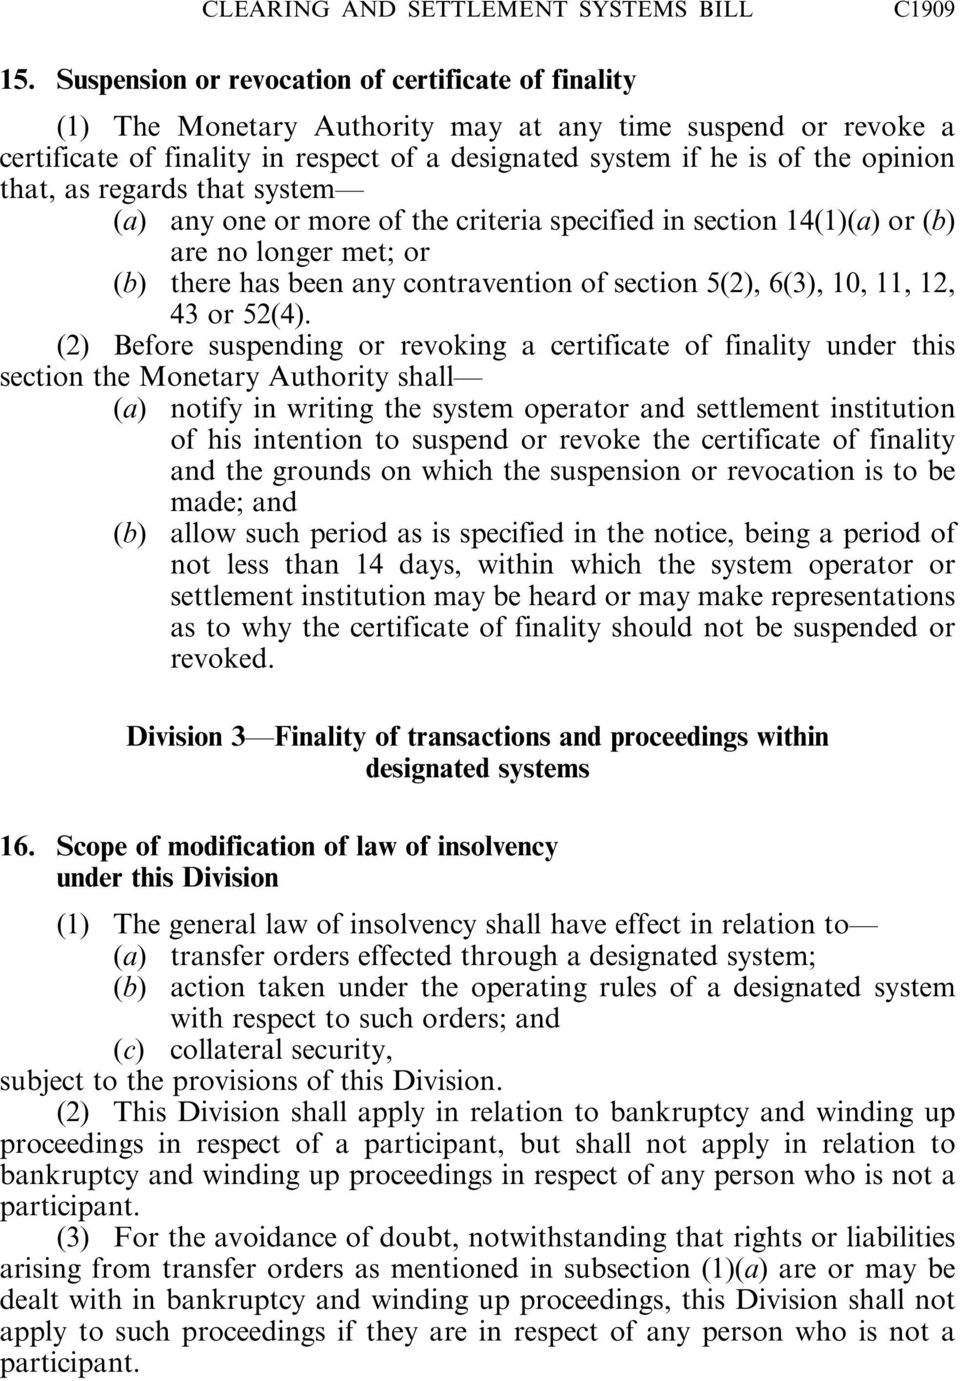 that, as regards that system (a) any one or more of the criteria specified in section 14(1)(a) or are no longer met; or there has been any contravention of section 5(2), 6(3), 10, 11, 12, 43 or 52(4).